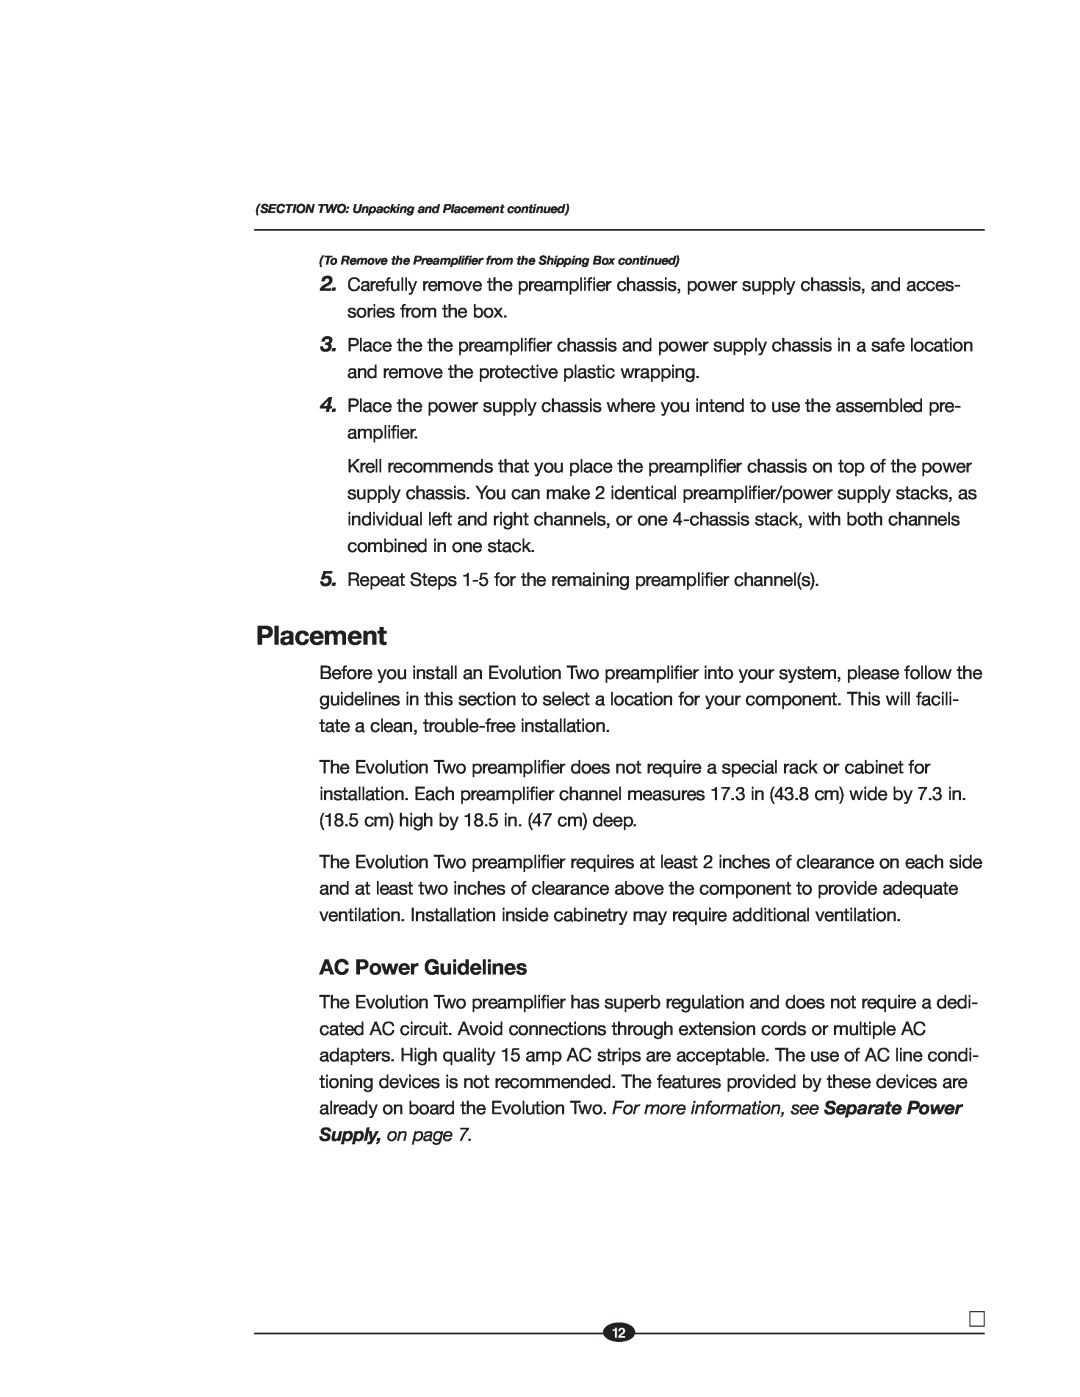 Krell Industries EVOLUTION TWO MONAURAL PREAMPLIFIER manual Placement, AC Power Guidelines 